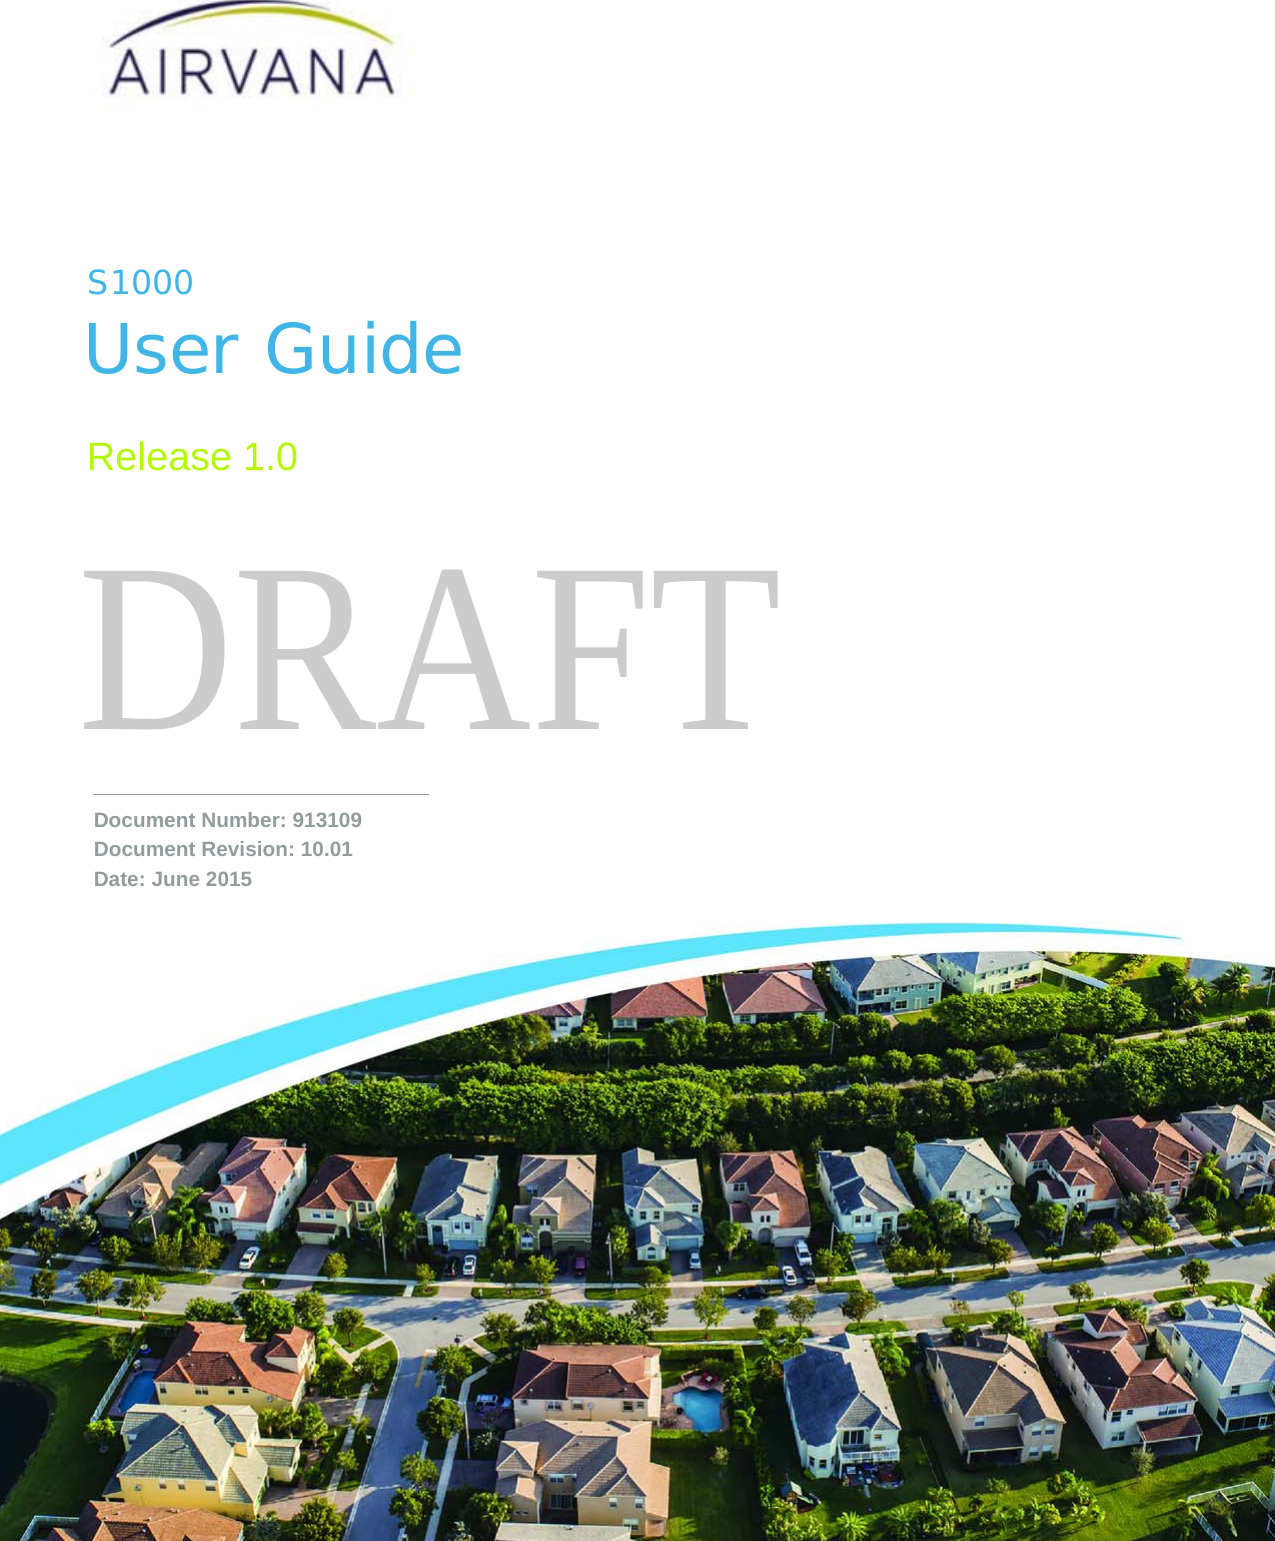 DRAFTUser GuideRelease 1.0Document Number: 913109 Document Revision: 10.01Date: June 2015S1000